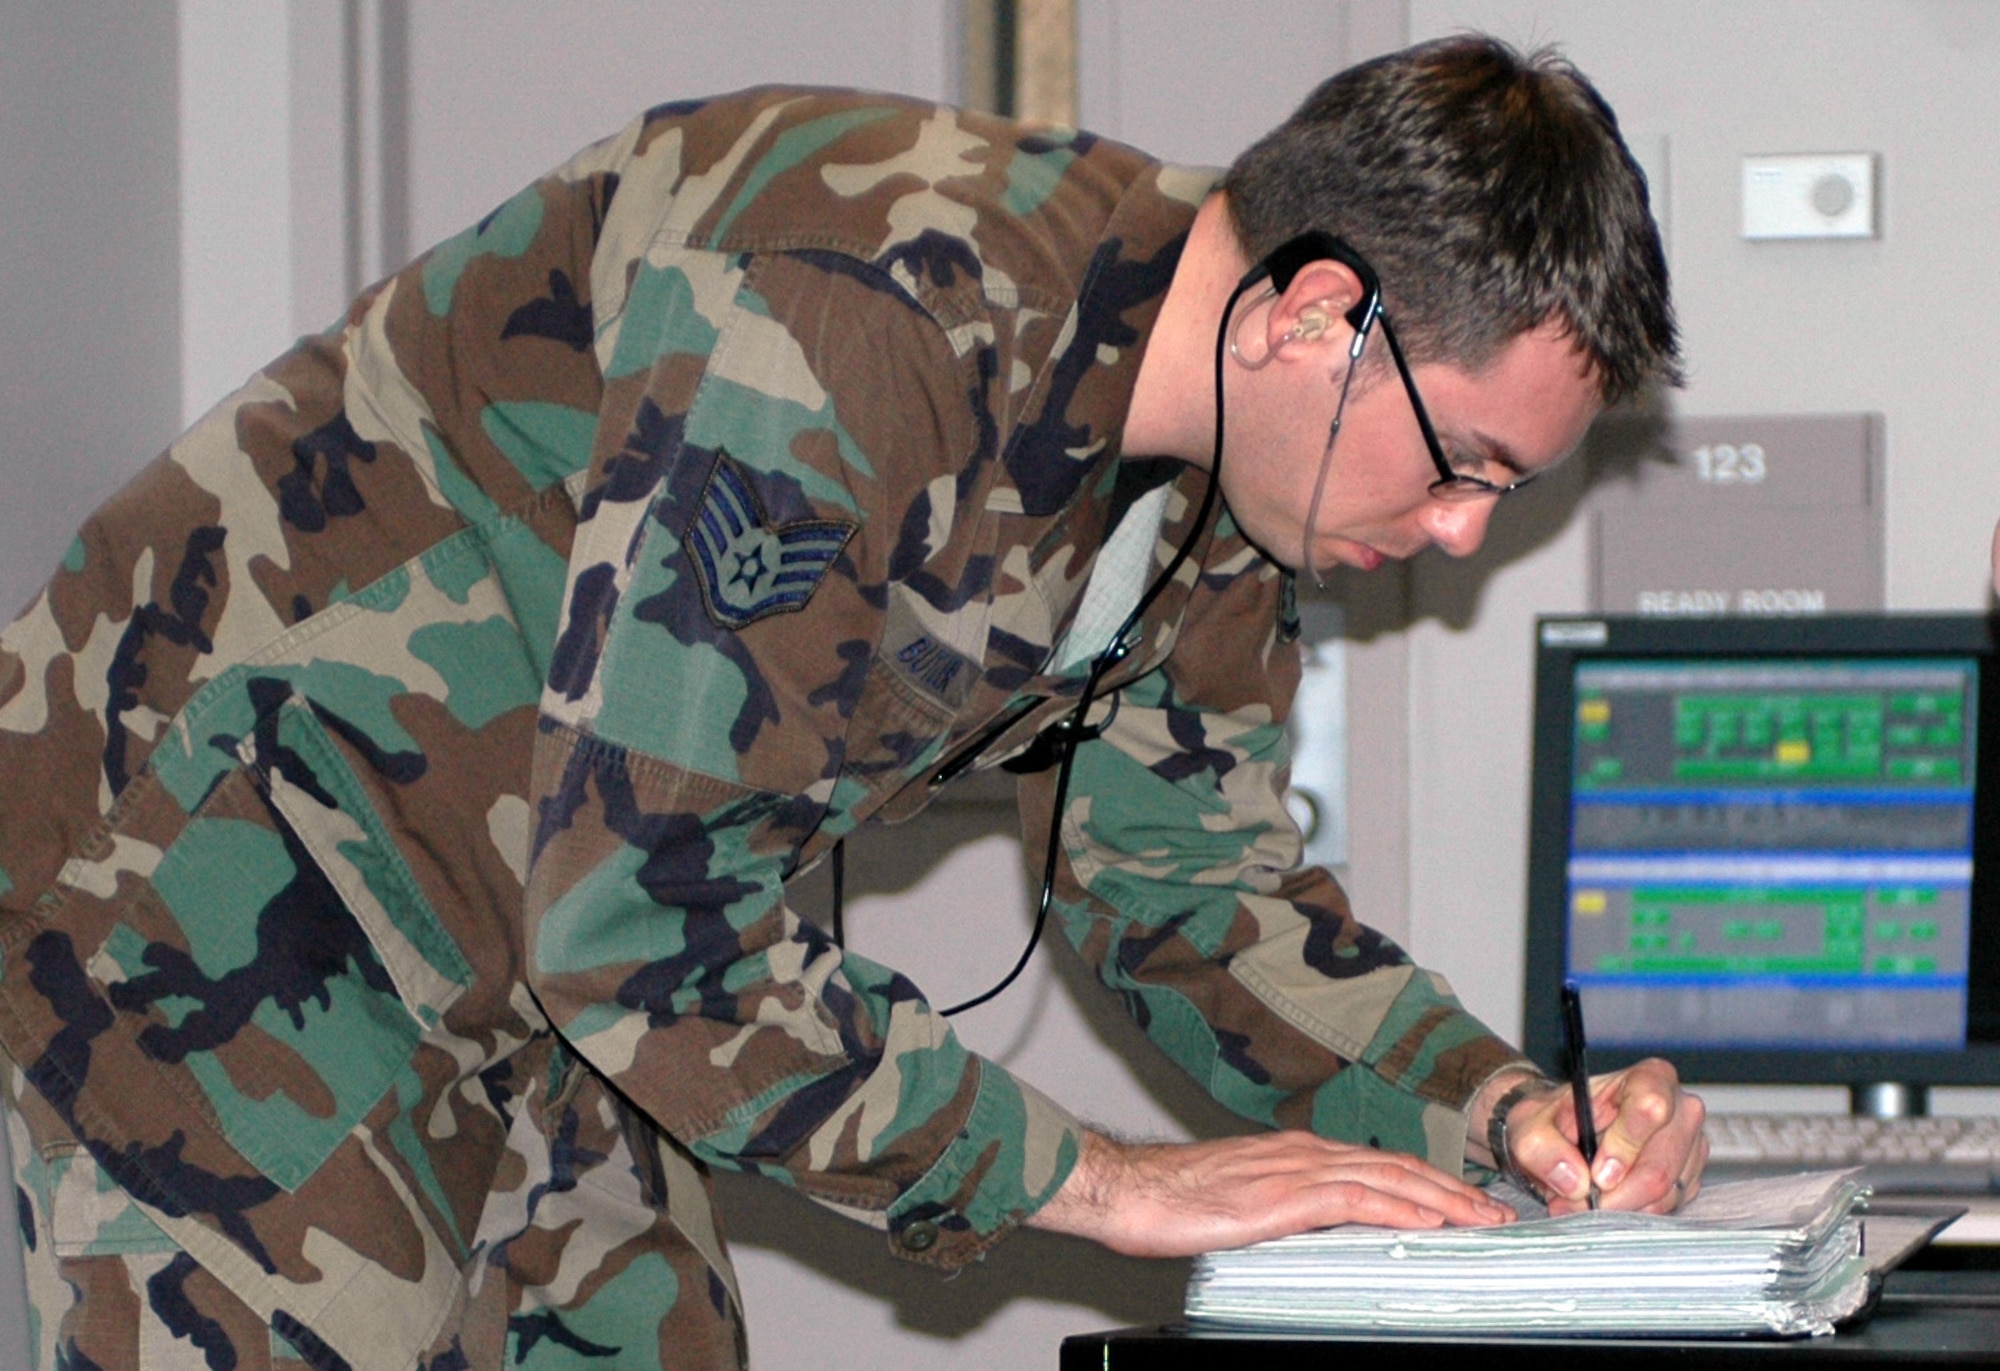 Staff Sgt. Charles Butler writes at the watch commander’s desk in the 60th Radar Approach Control flight’s operation room. Sergeant Butler handles flight data and clearance delivery. (U.S. Air Force photo/Nick DeCicco)